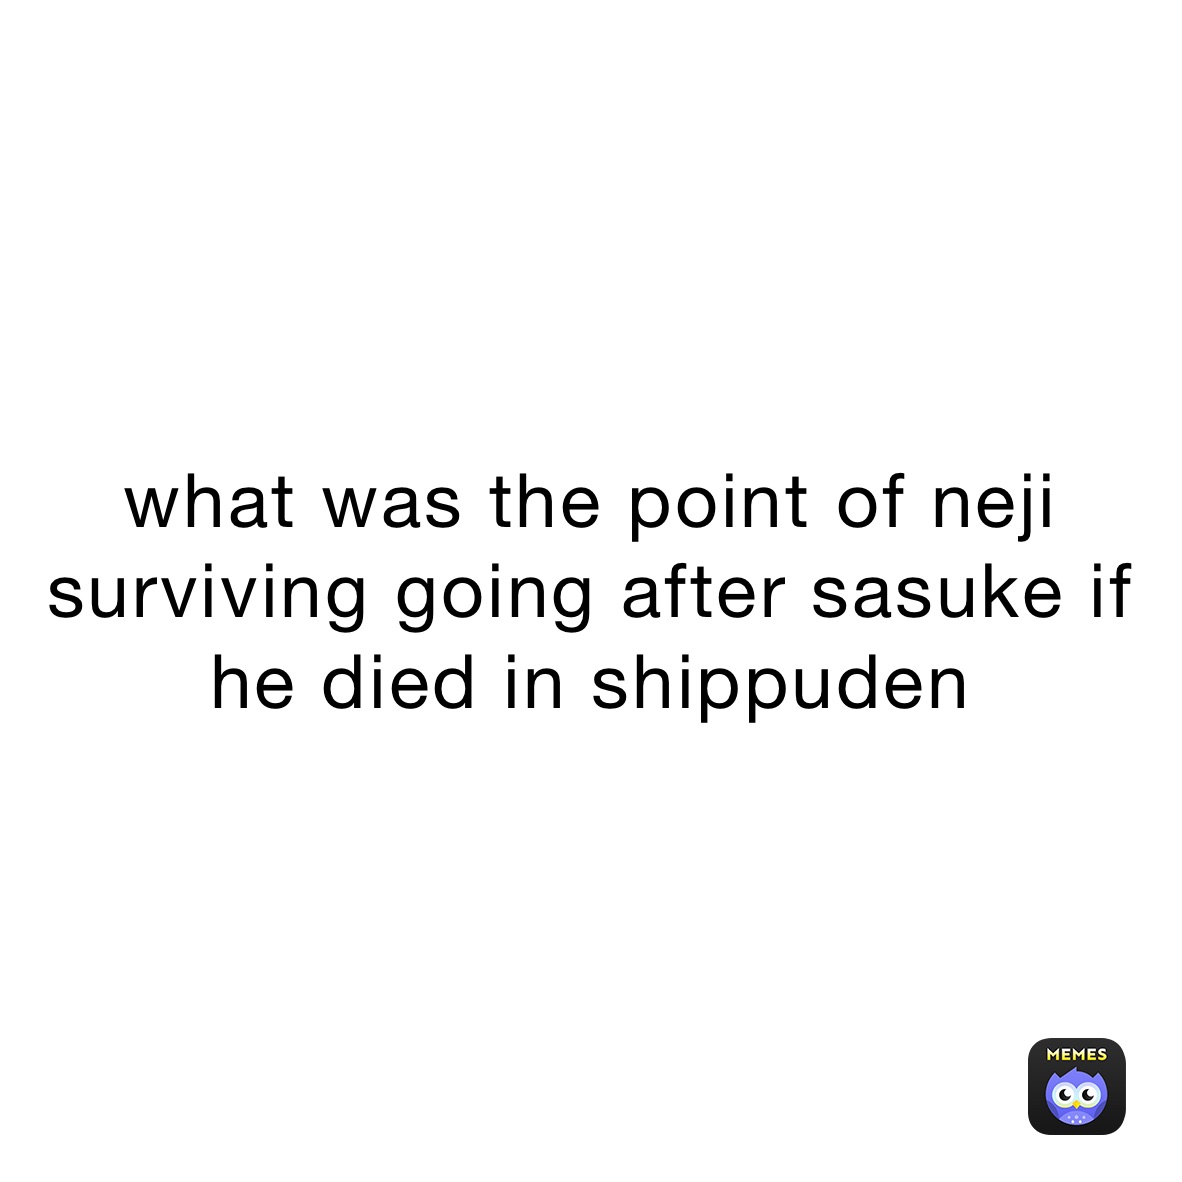 what was the point of neji surviving going after sasuke if he died in shippuden